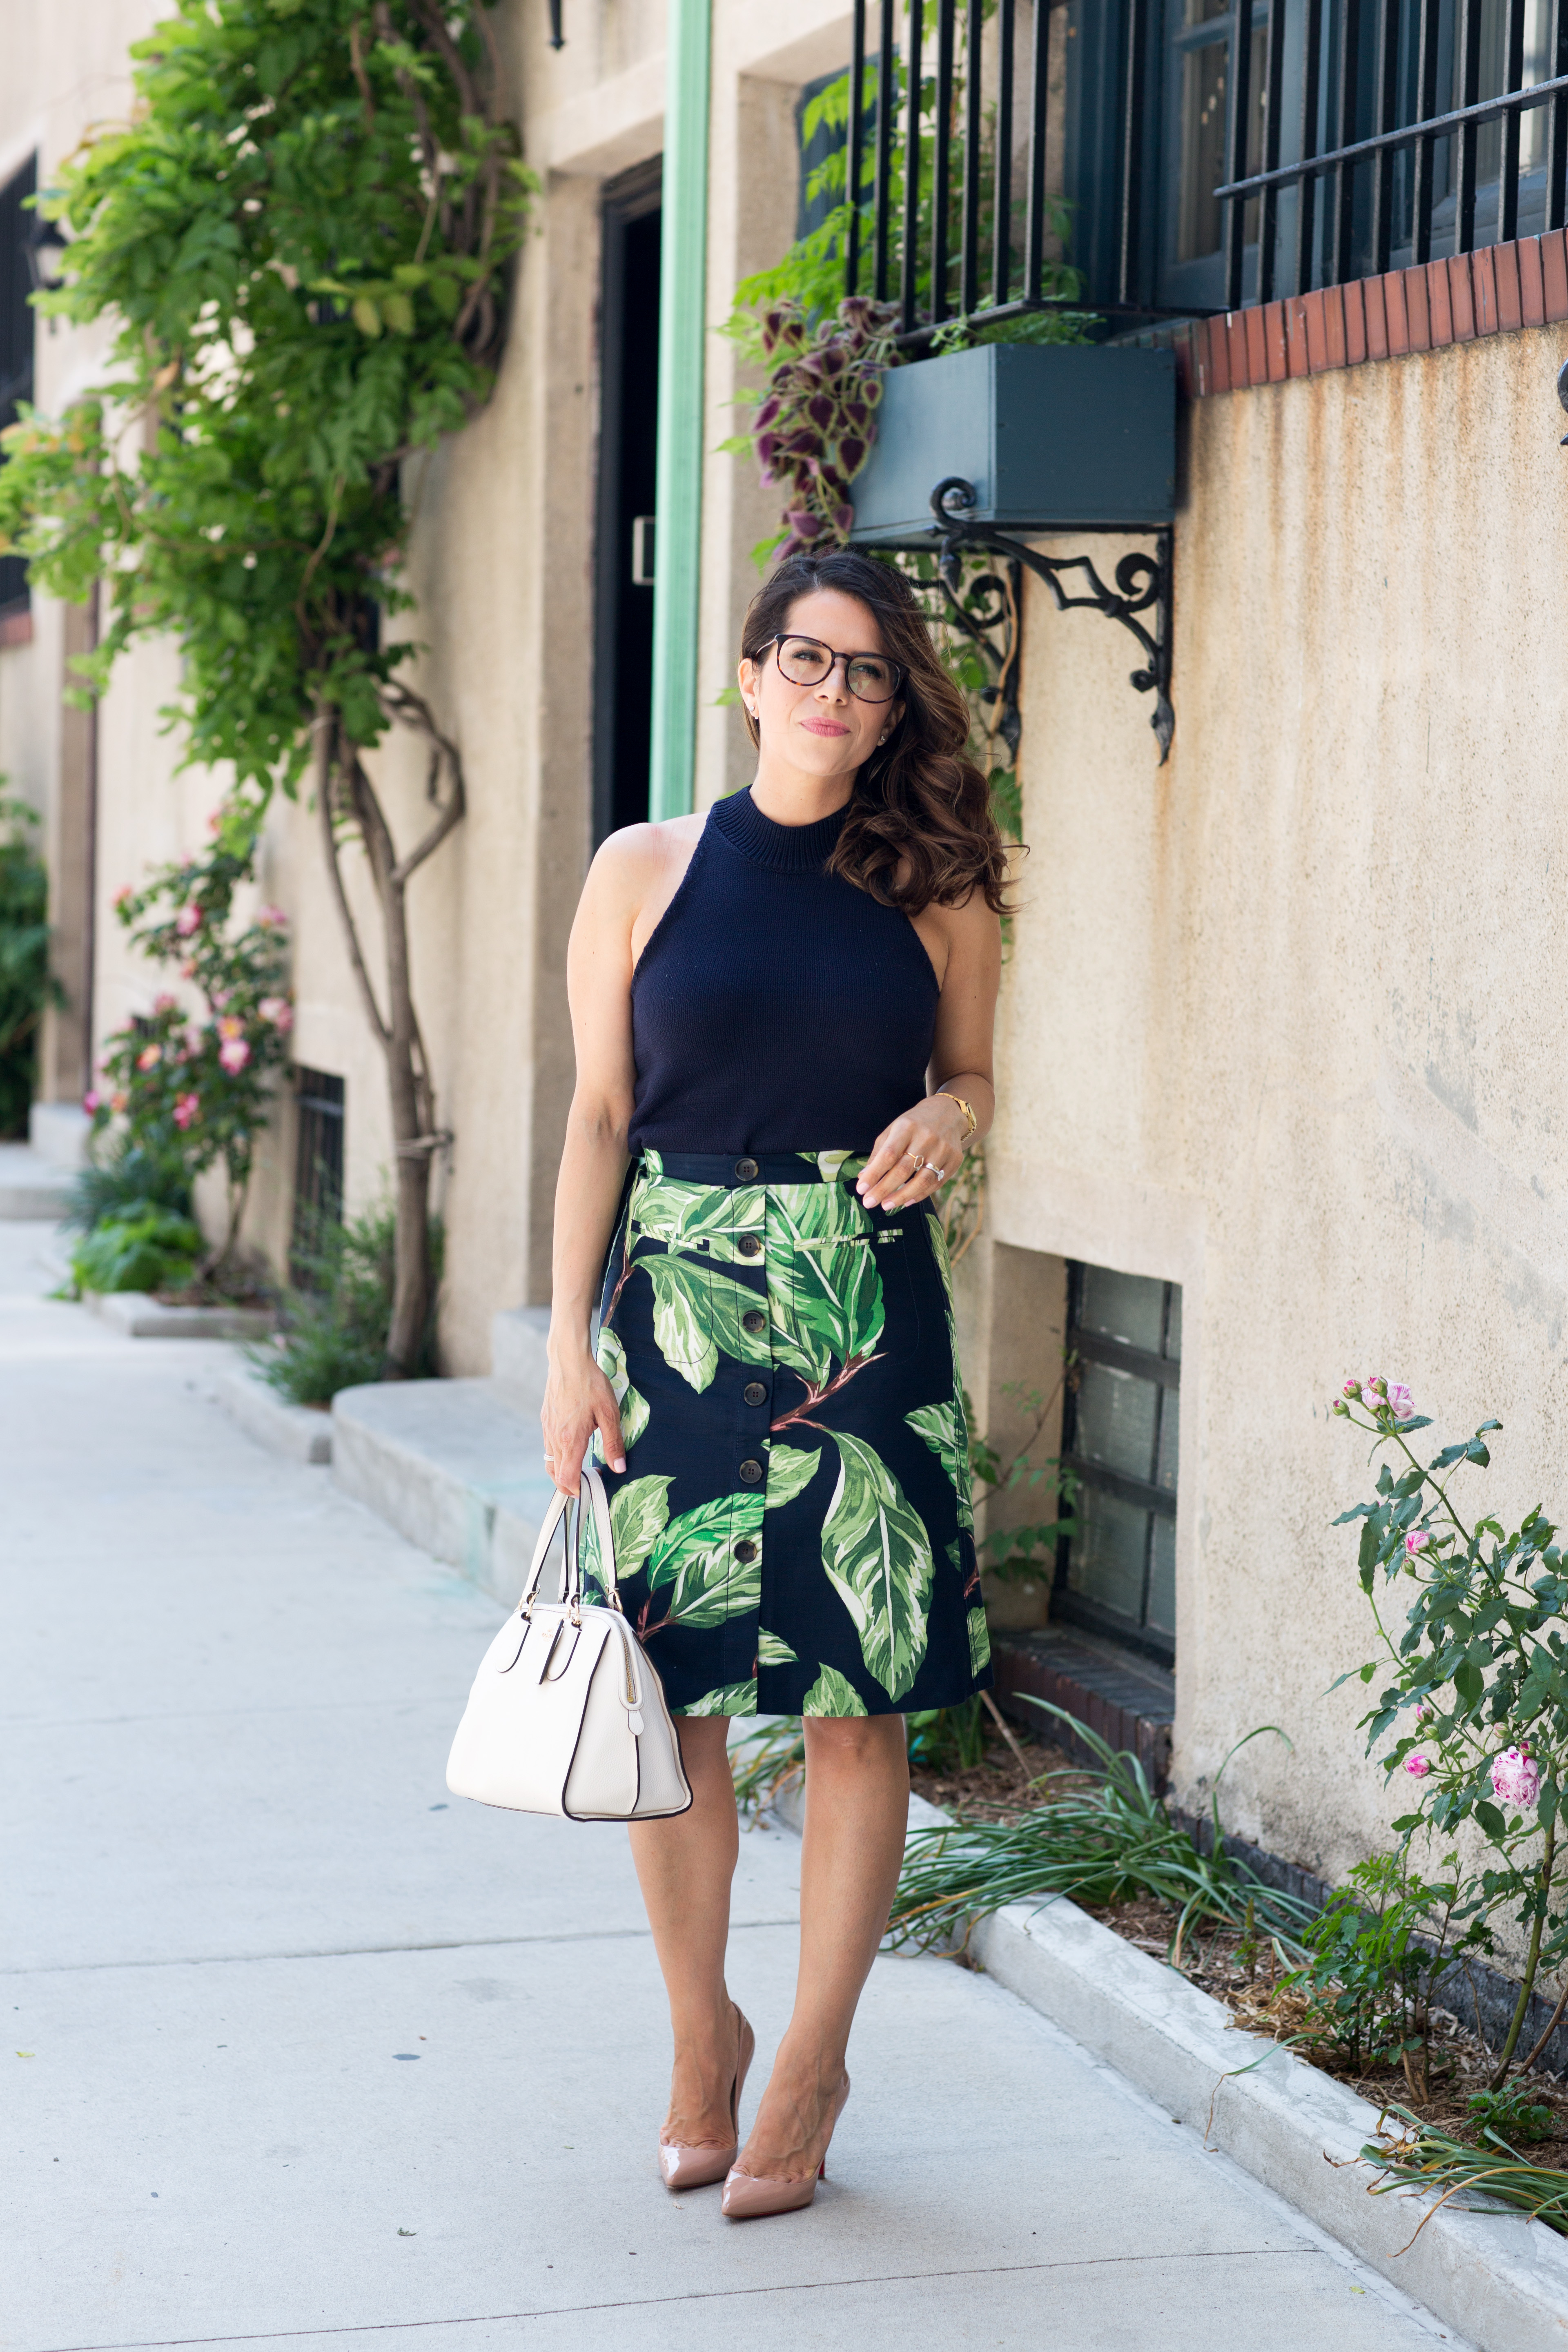 Ann Taylor palm skirt and navy sweater halter top for summer workwear outfit by Corporate Catwalk